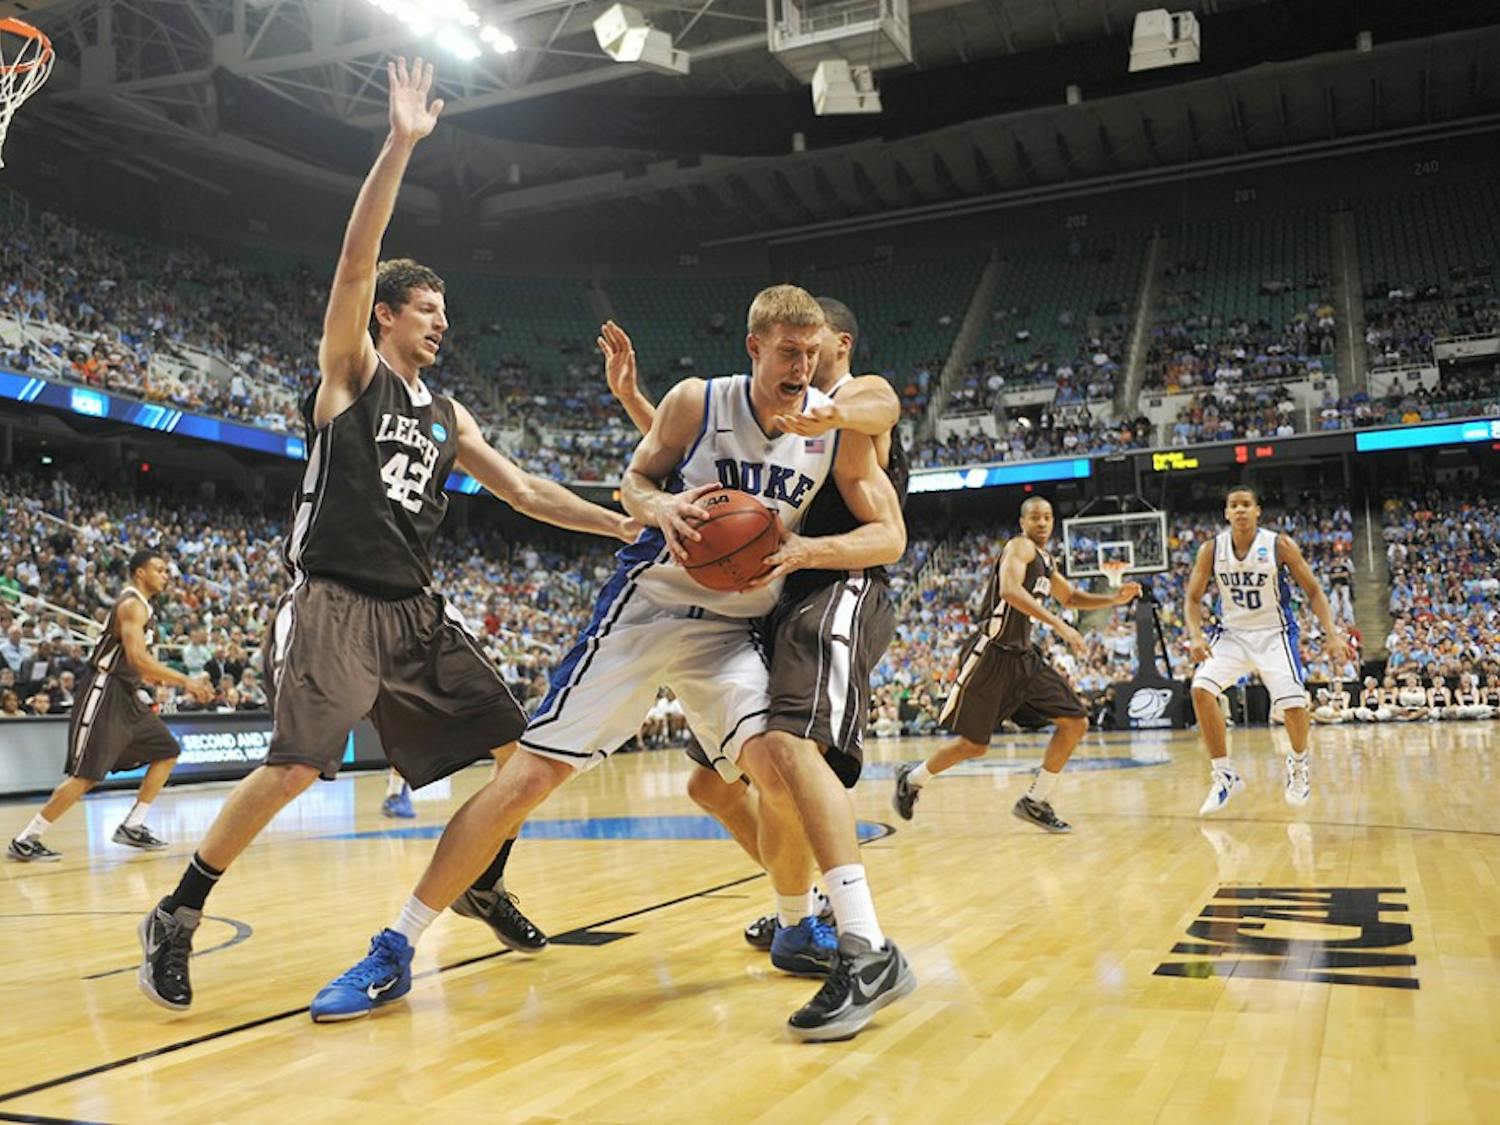 If Mason Plumlee leaves for the NBA Draft, Claxton writes, Duke would be left with a major hole in its frontcourt.